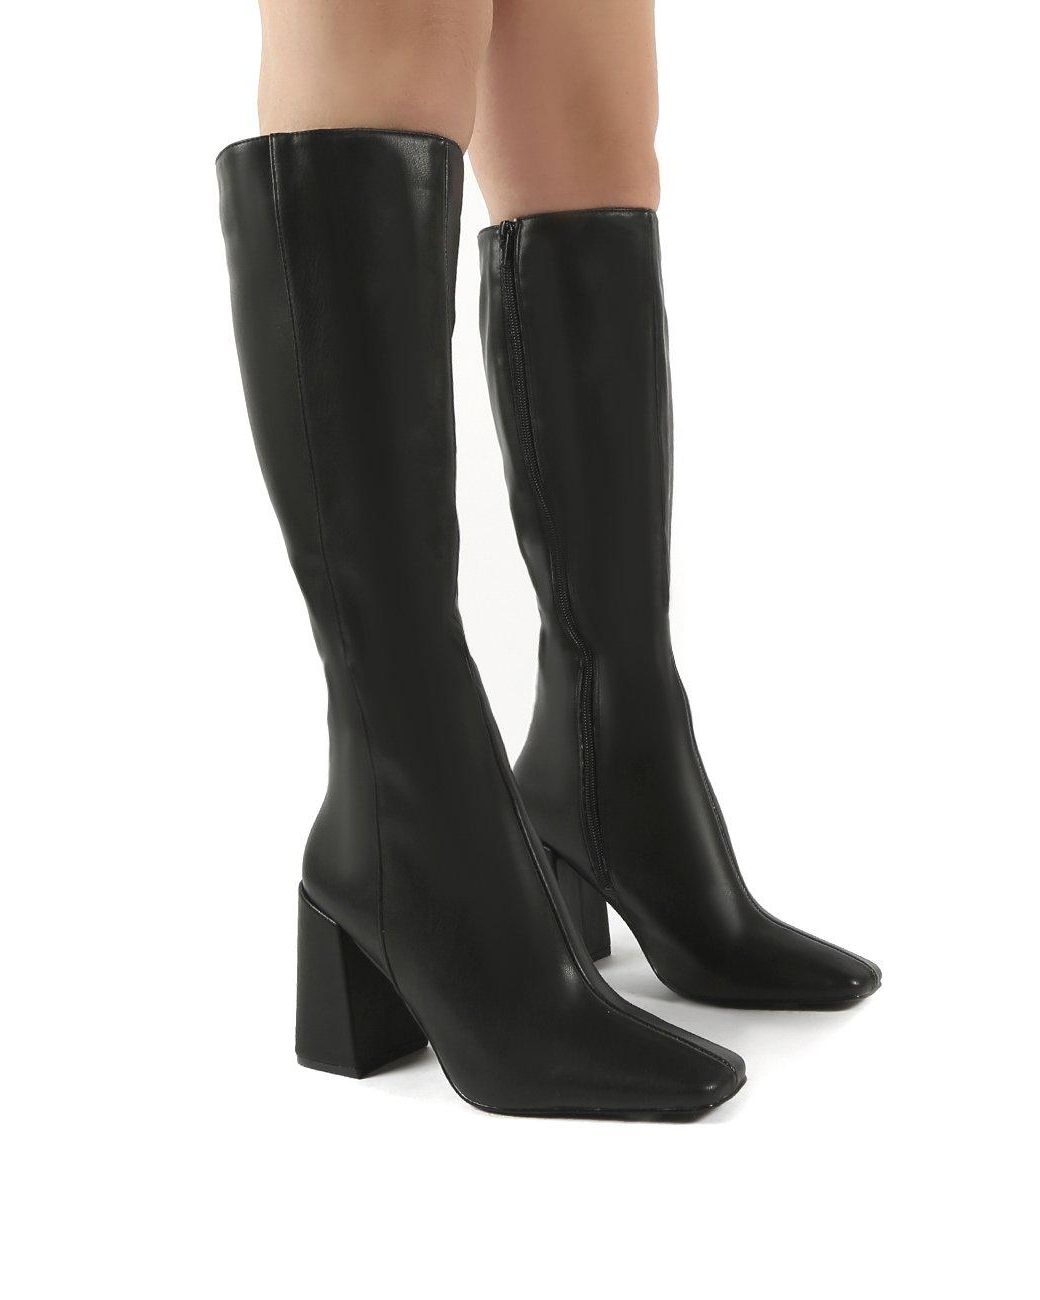 Public Desire Synthetic Apology Black Pu Knee High Block Heel Boots - Lyst